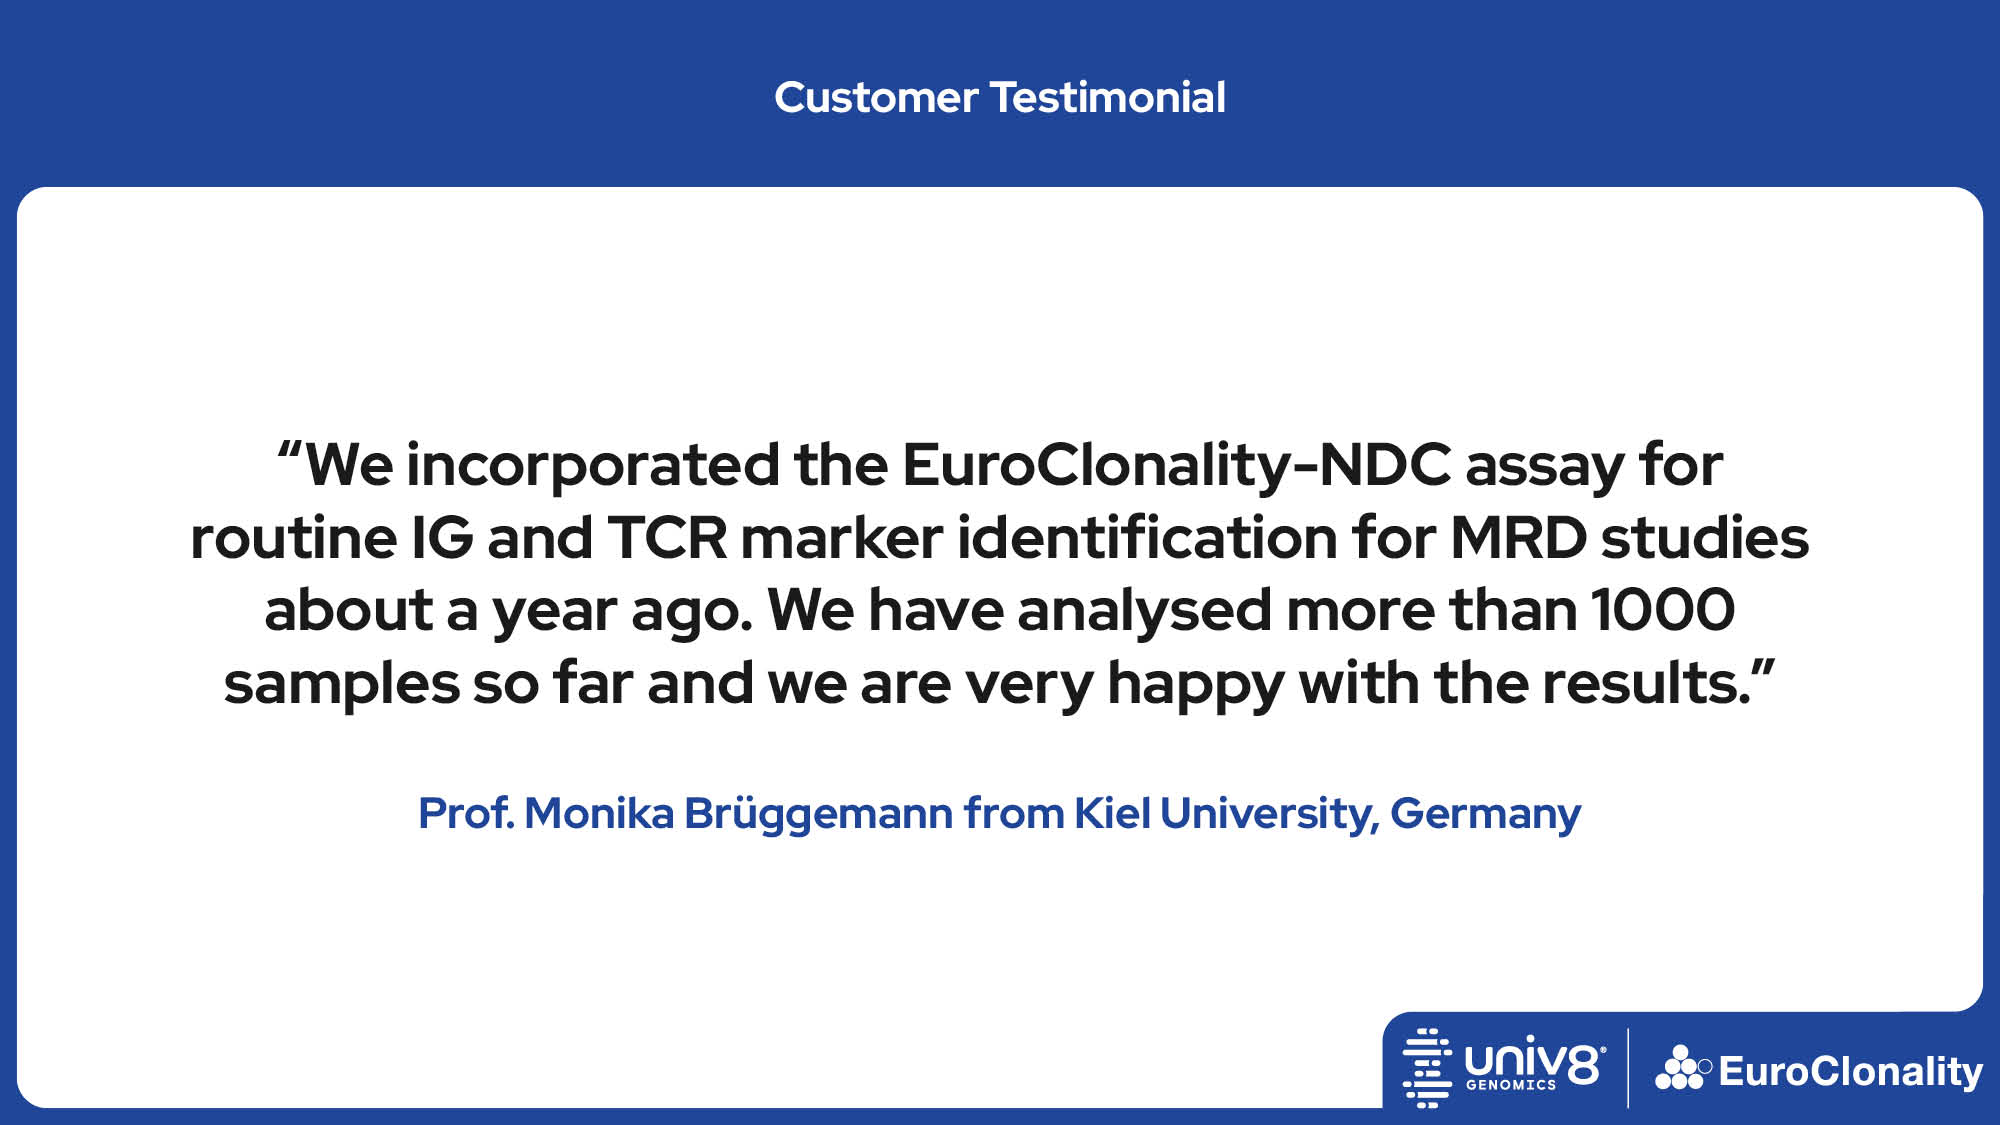 “We incorporated the EuroClonality-NDC assay for routine IG and TCR marker identification for MRD studies about a year ago. We have analysed more than 1000 samples so far and we are very happy with the results.” Prof. Monika Brüggemann from Kiel University, Germany